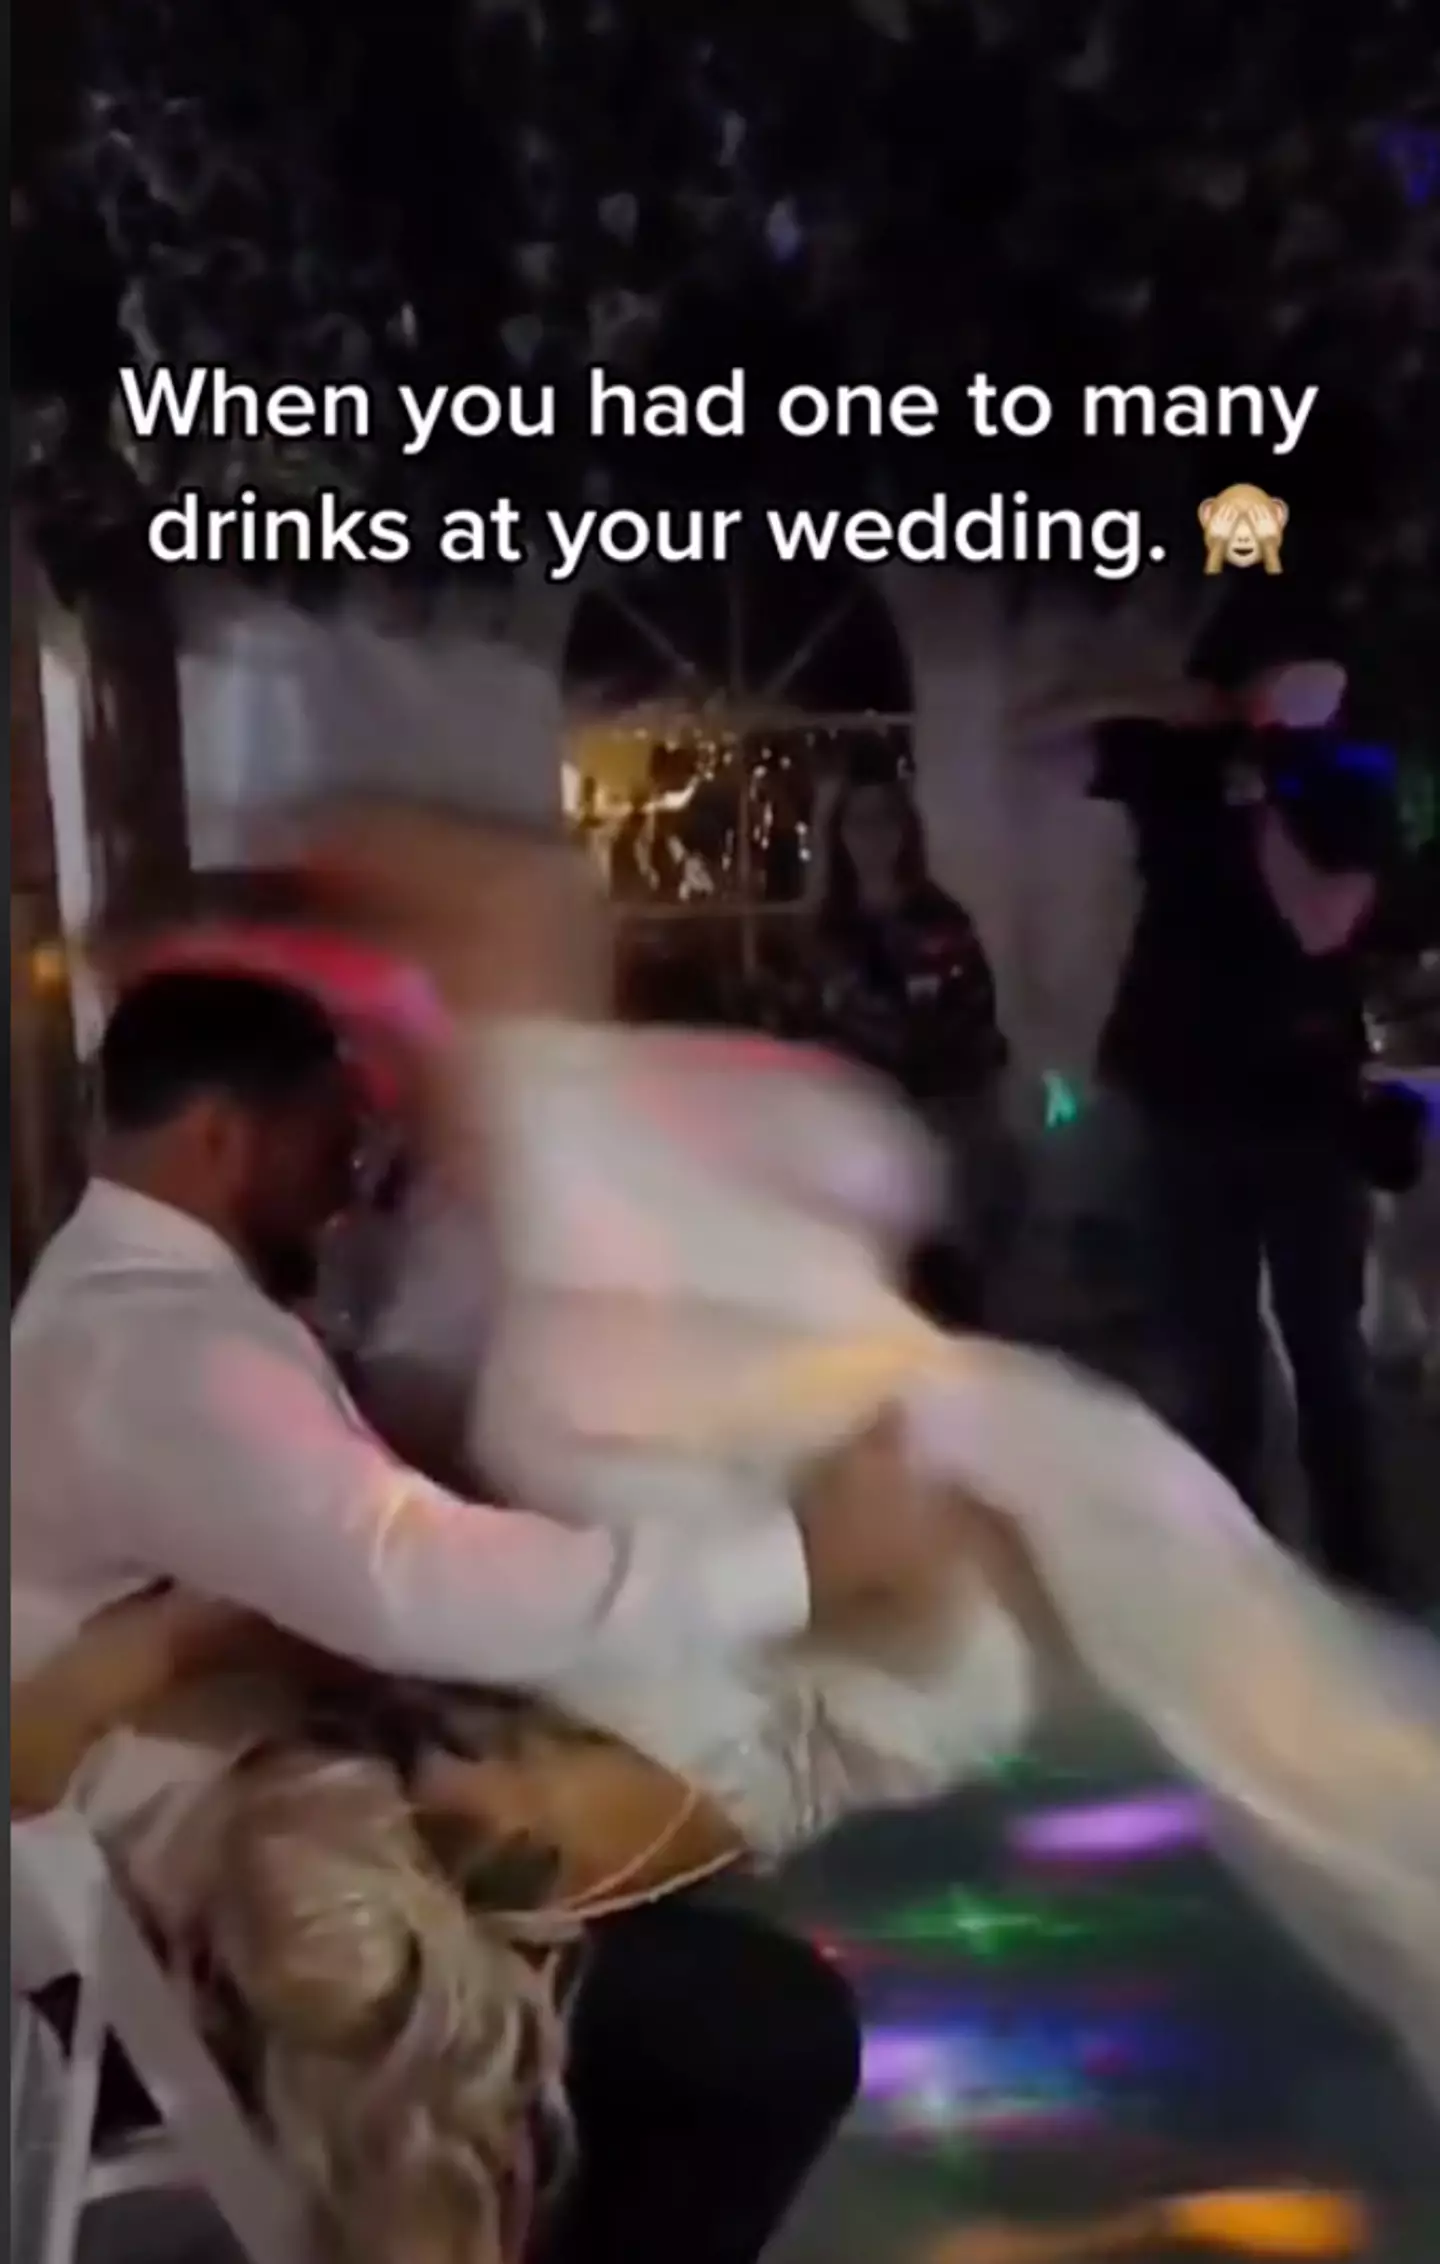 The bride could be seen throwing her legs over her hubby's head.